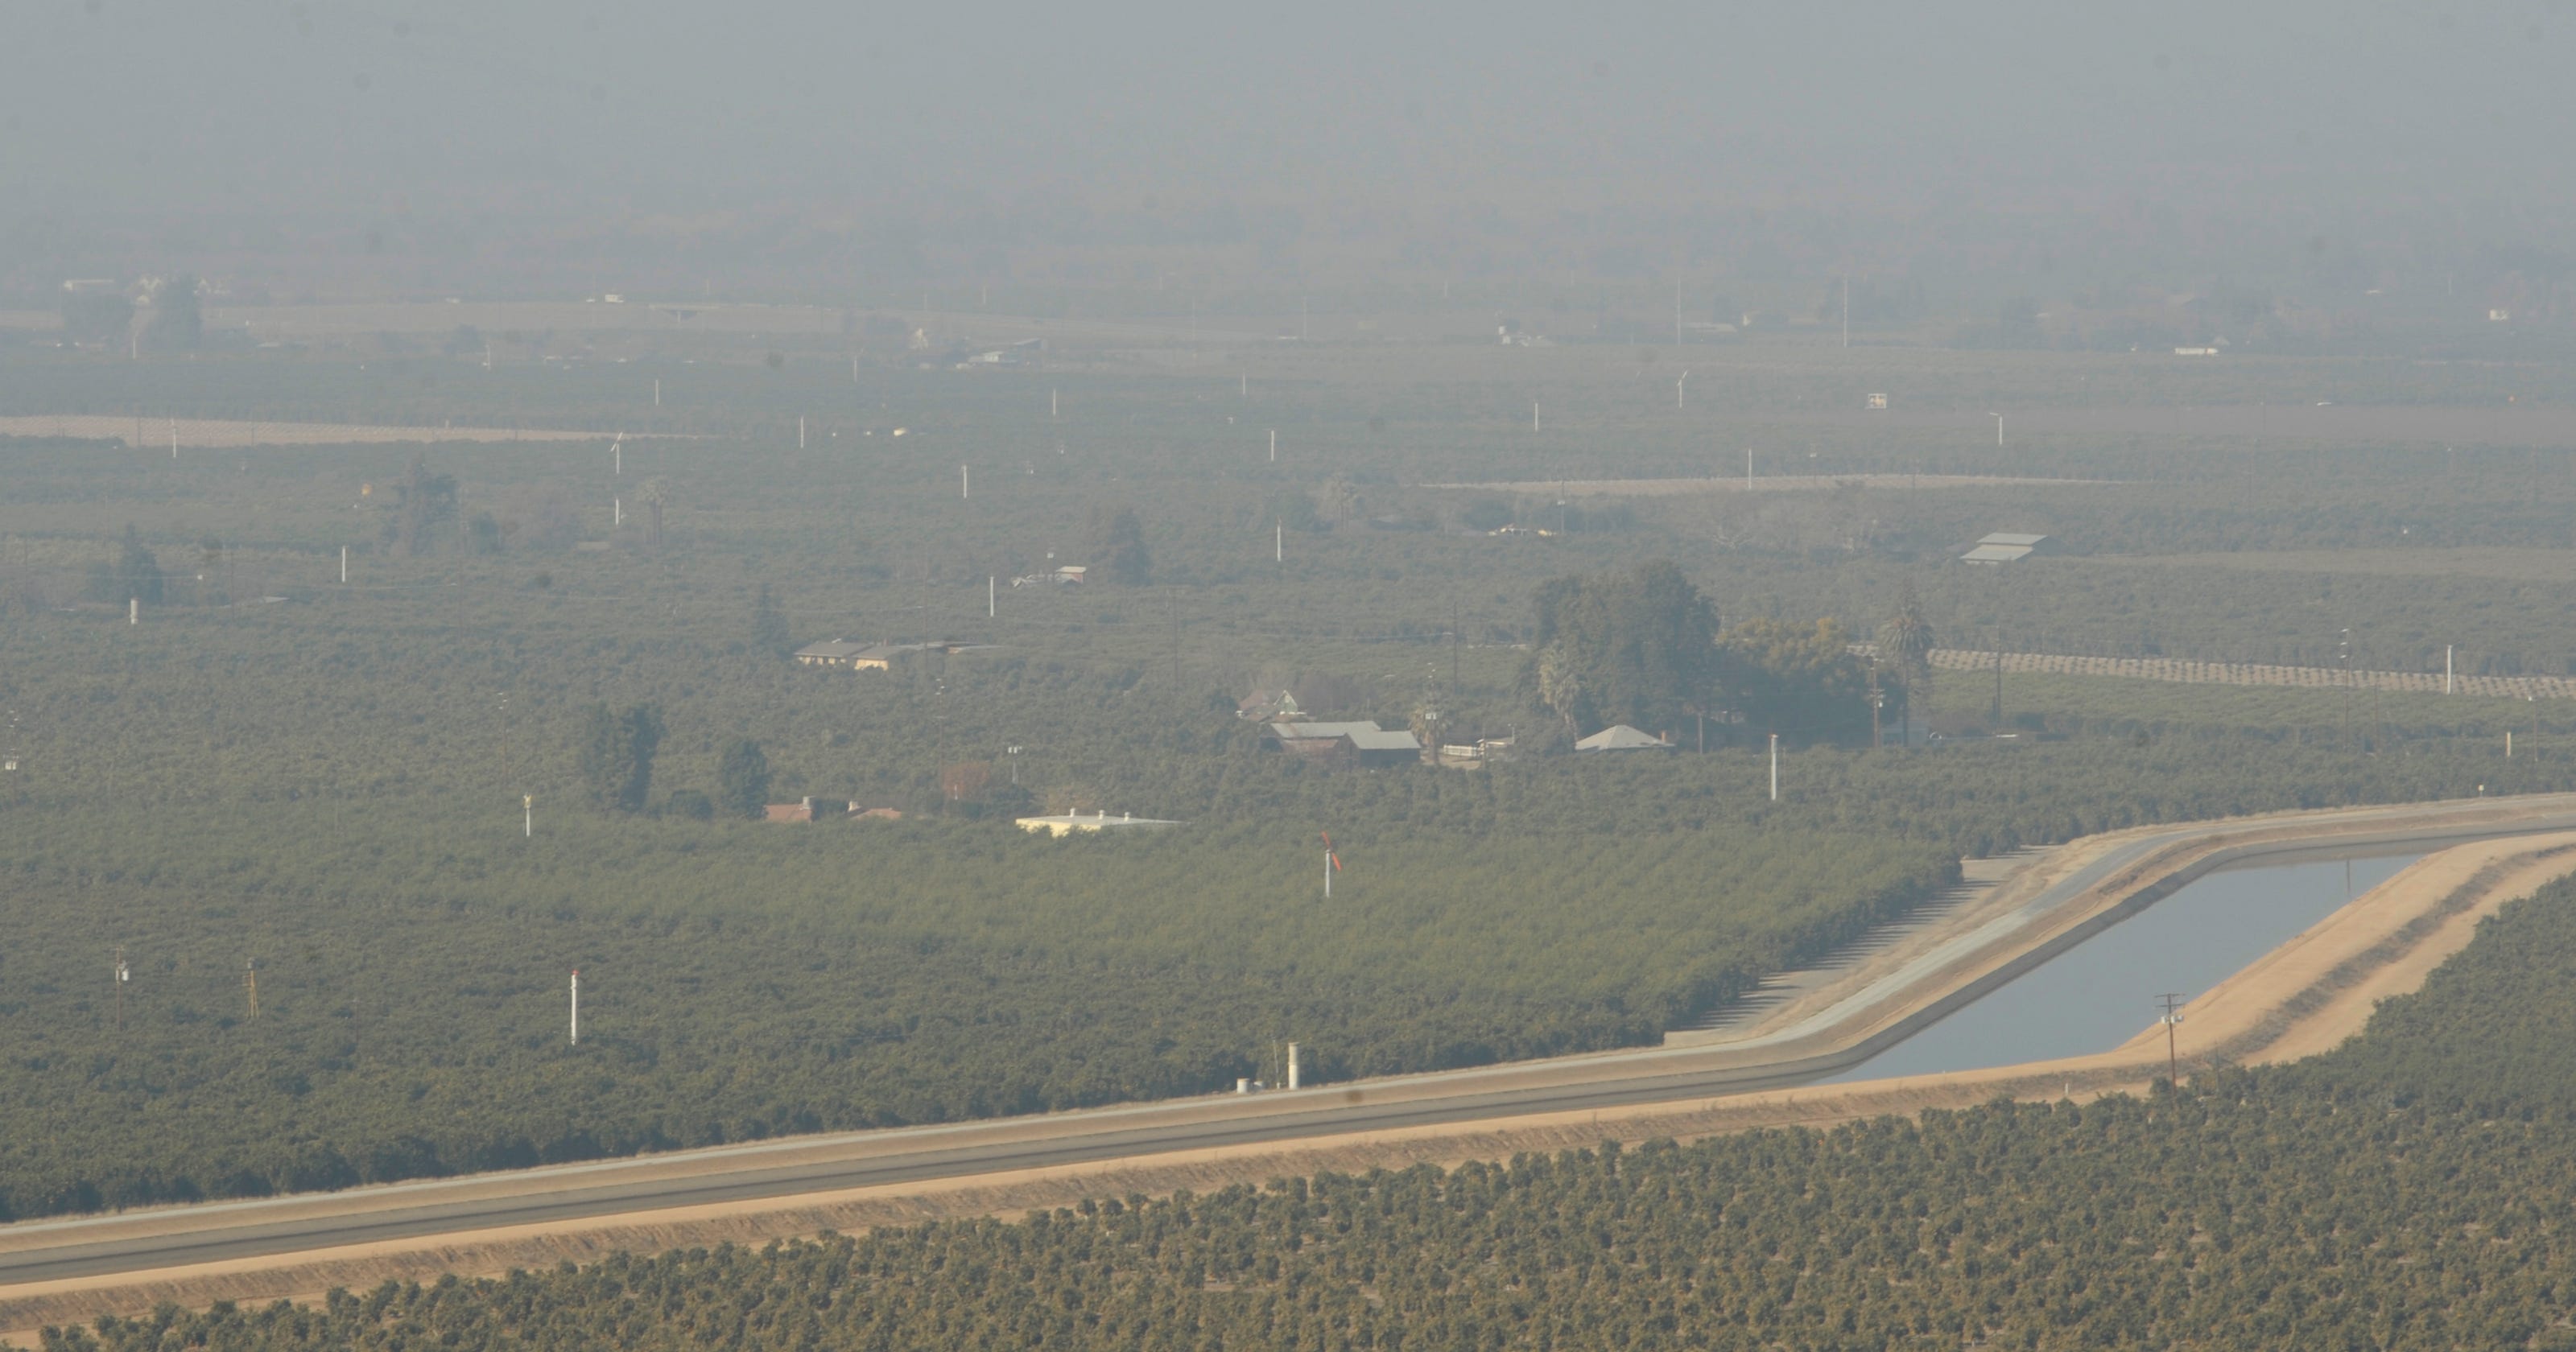 The San Joaquin Valley Air Pollution Control District receives funding